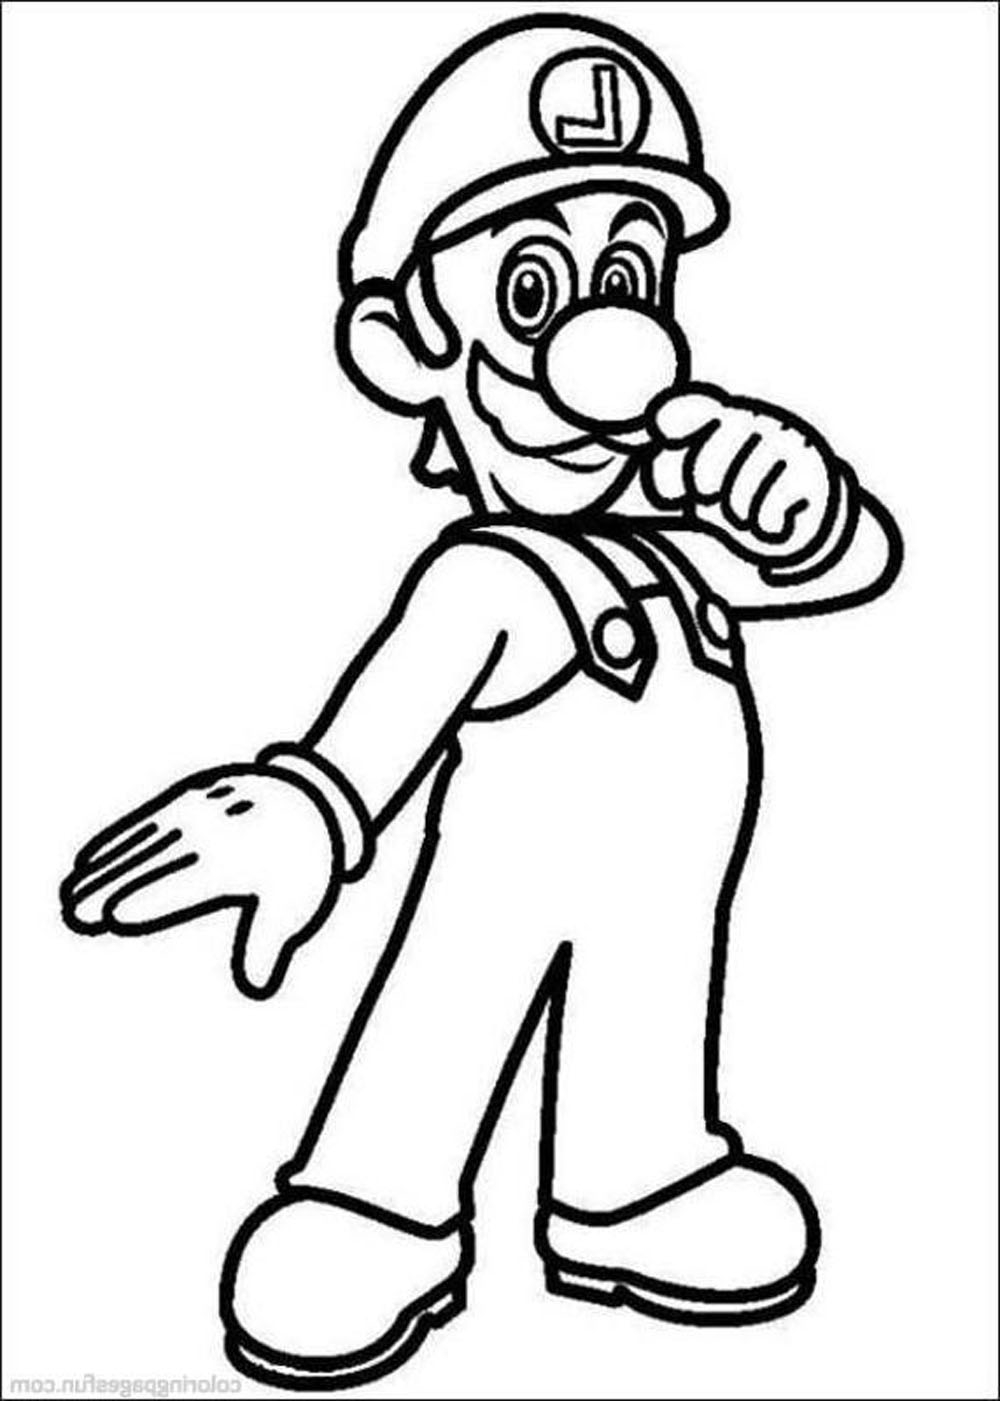 Coloring Pages Of Luigi - Free Printable Templates